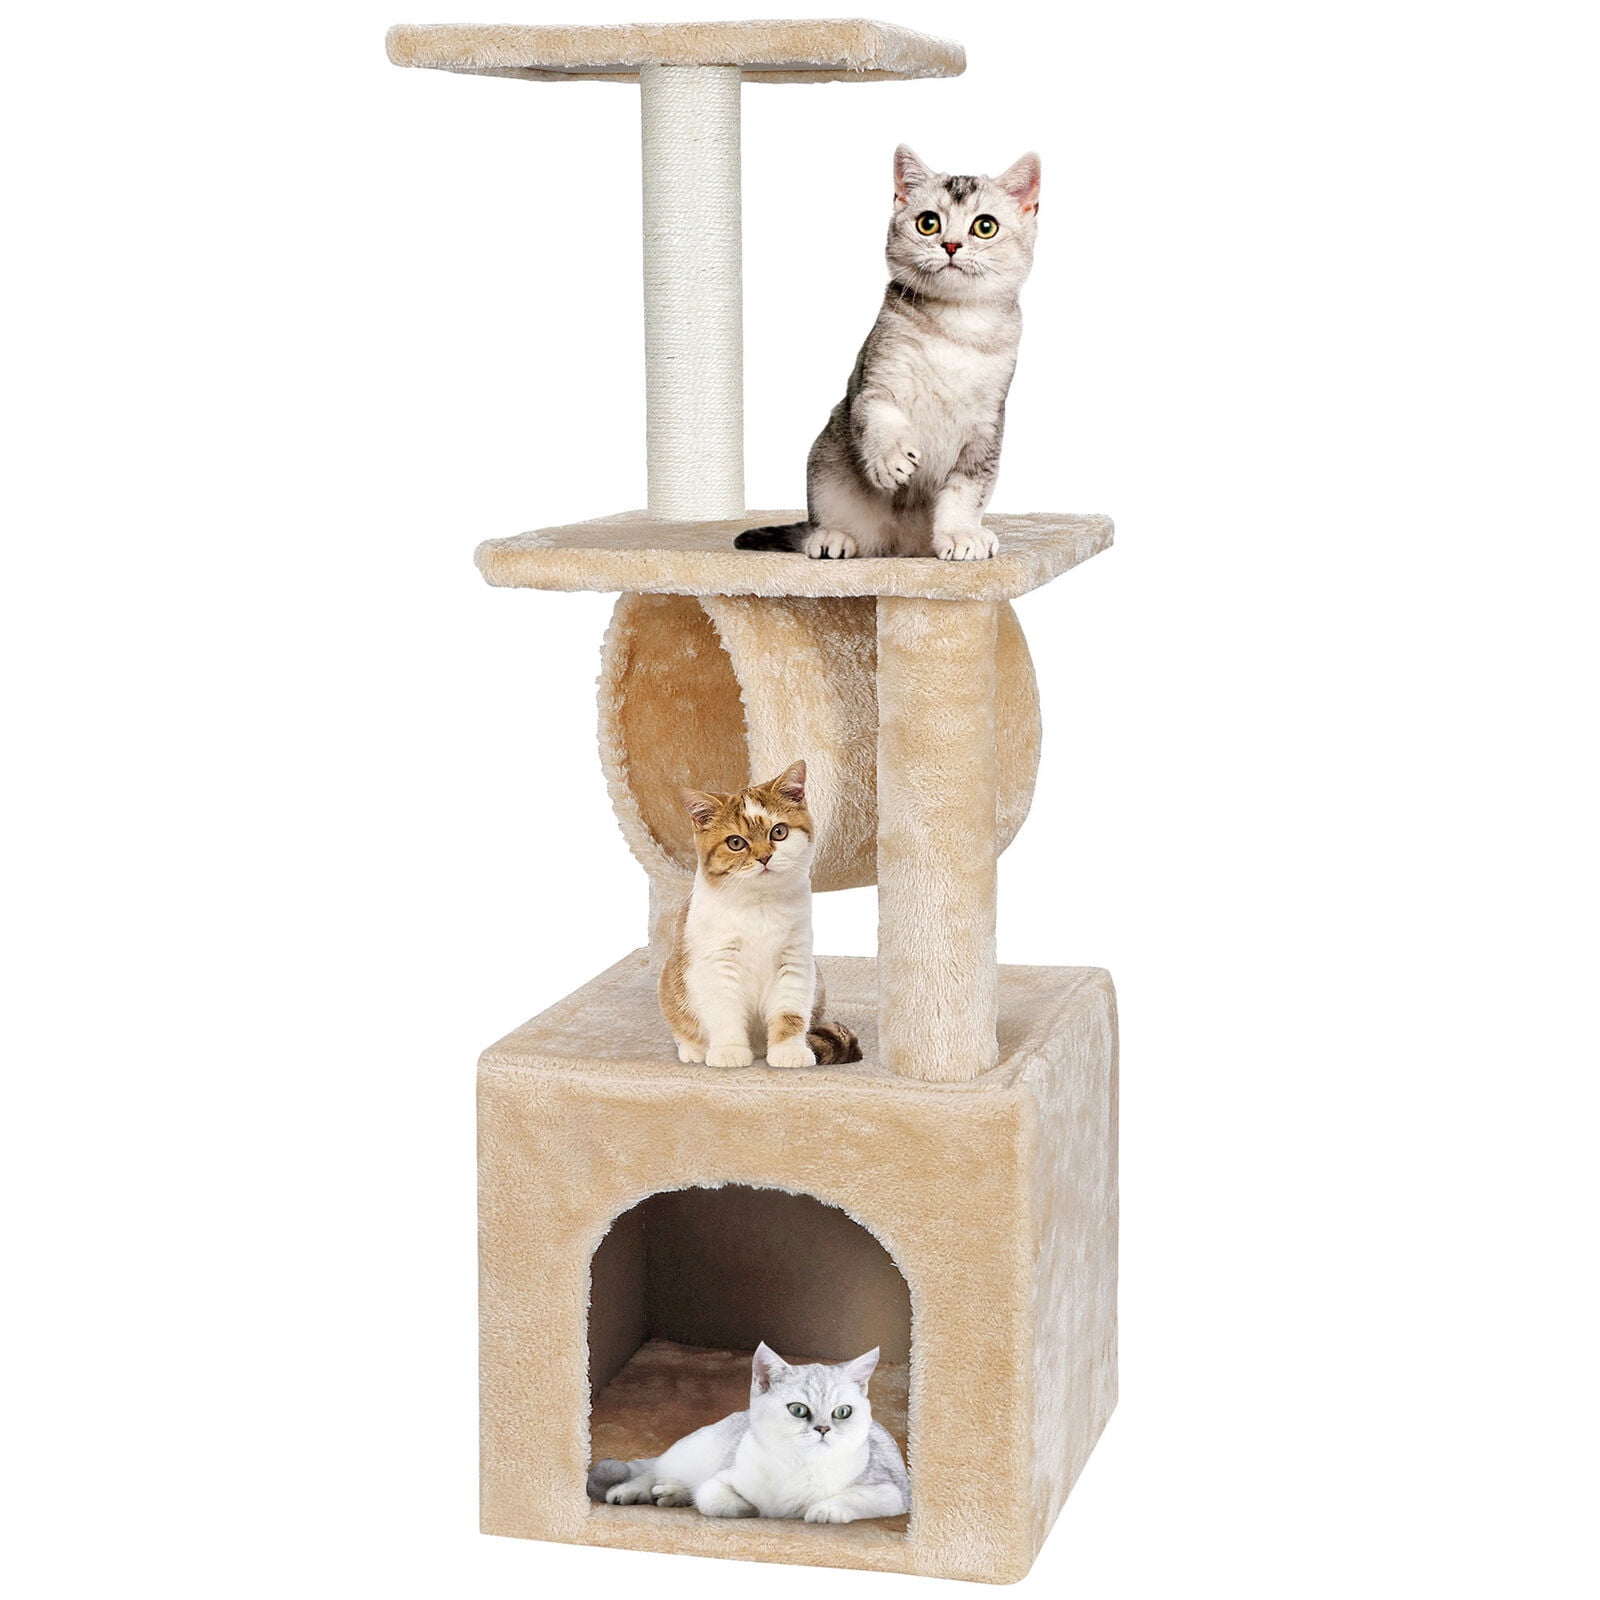 Deluxe 36" Cat Tree Condo Furniture Play Toy Kitten Pet House Beige with paw 